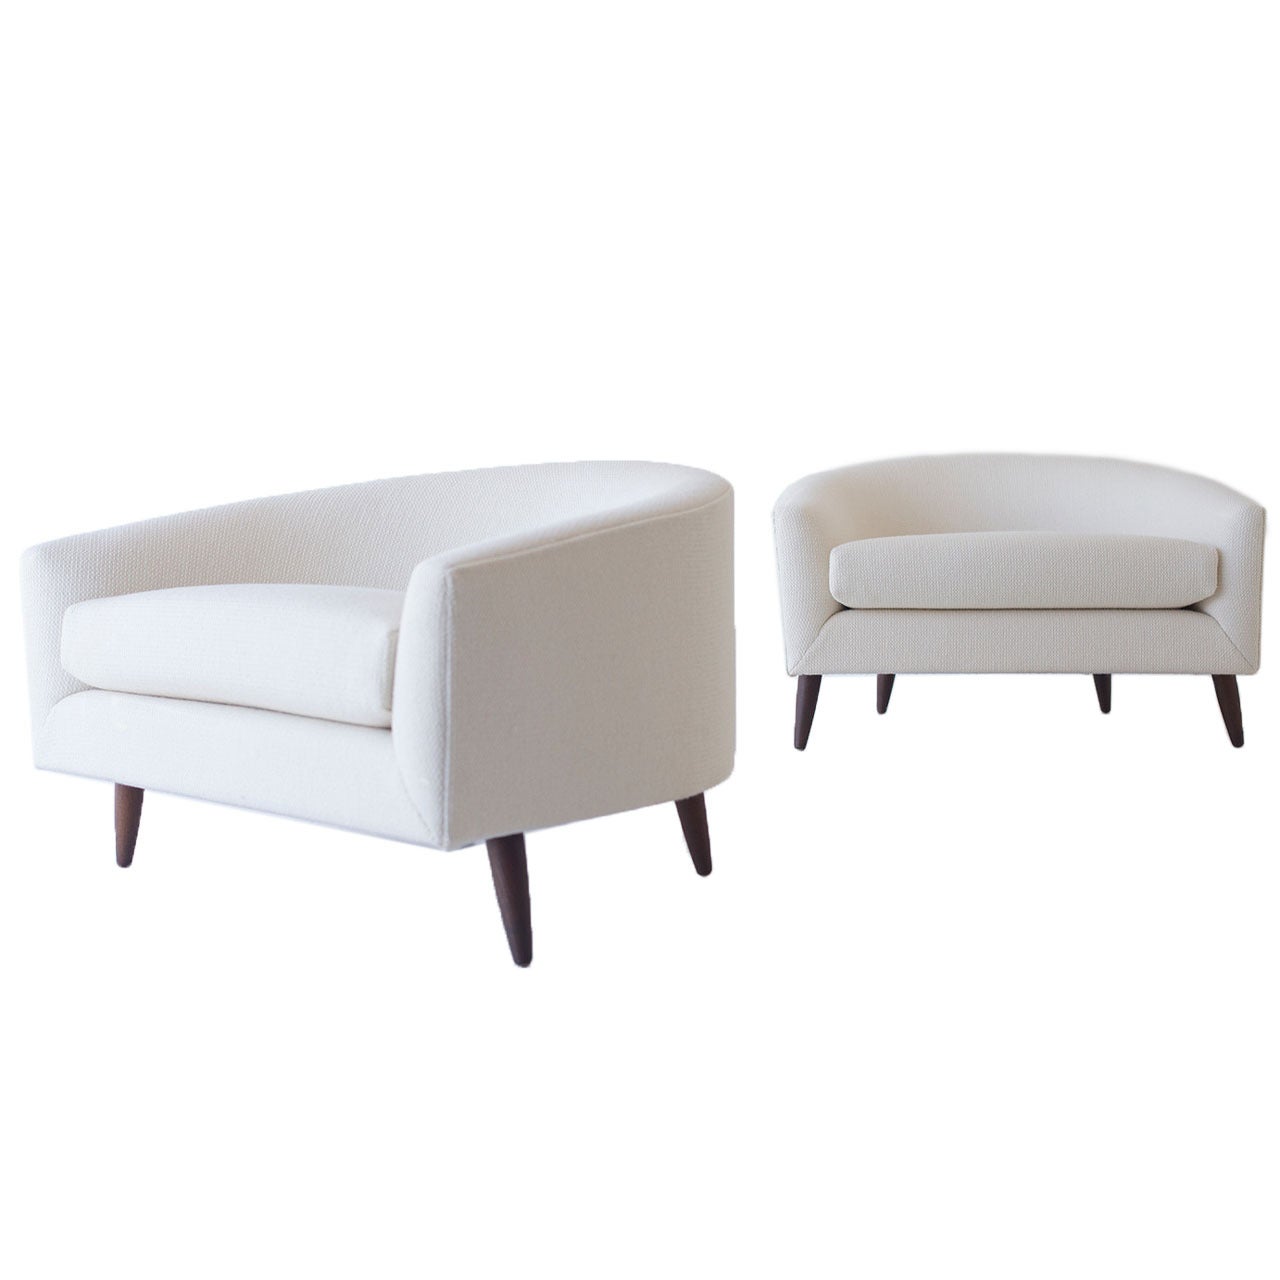 Adrian Pearsall Cloud Chairs for Craft Associates Inc.